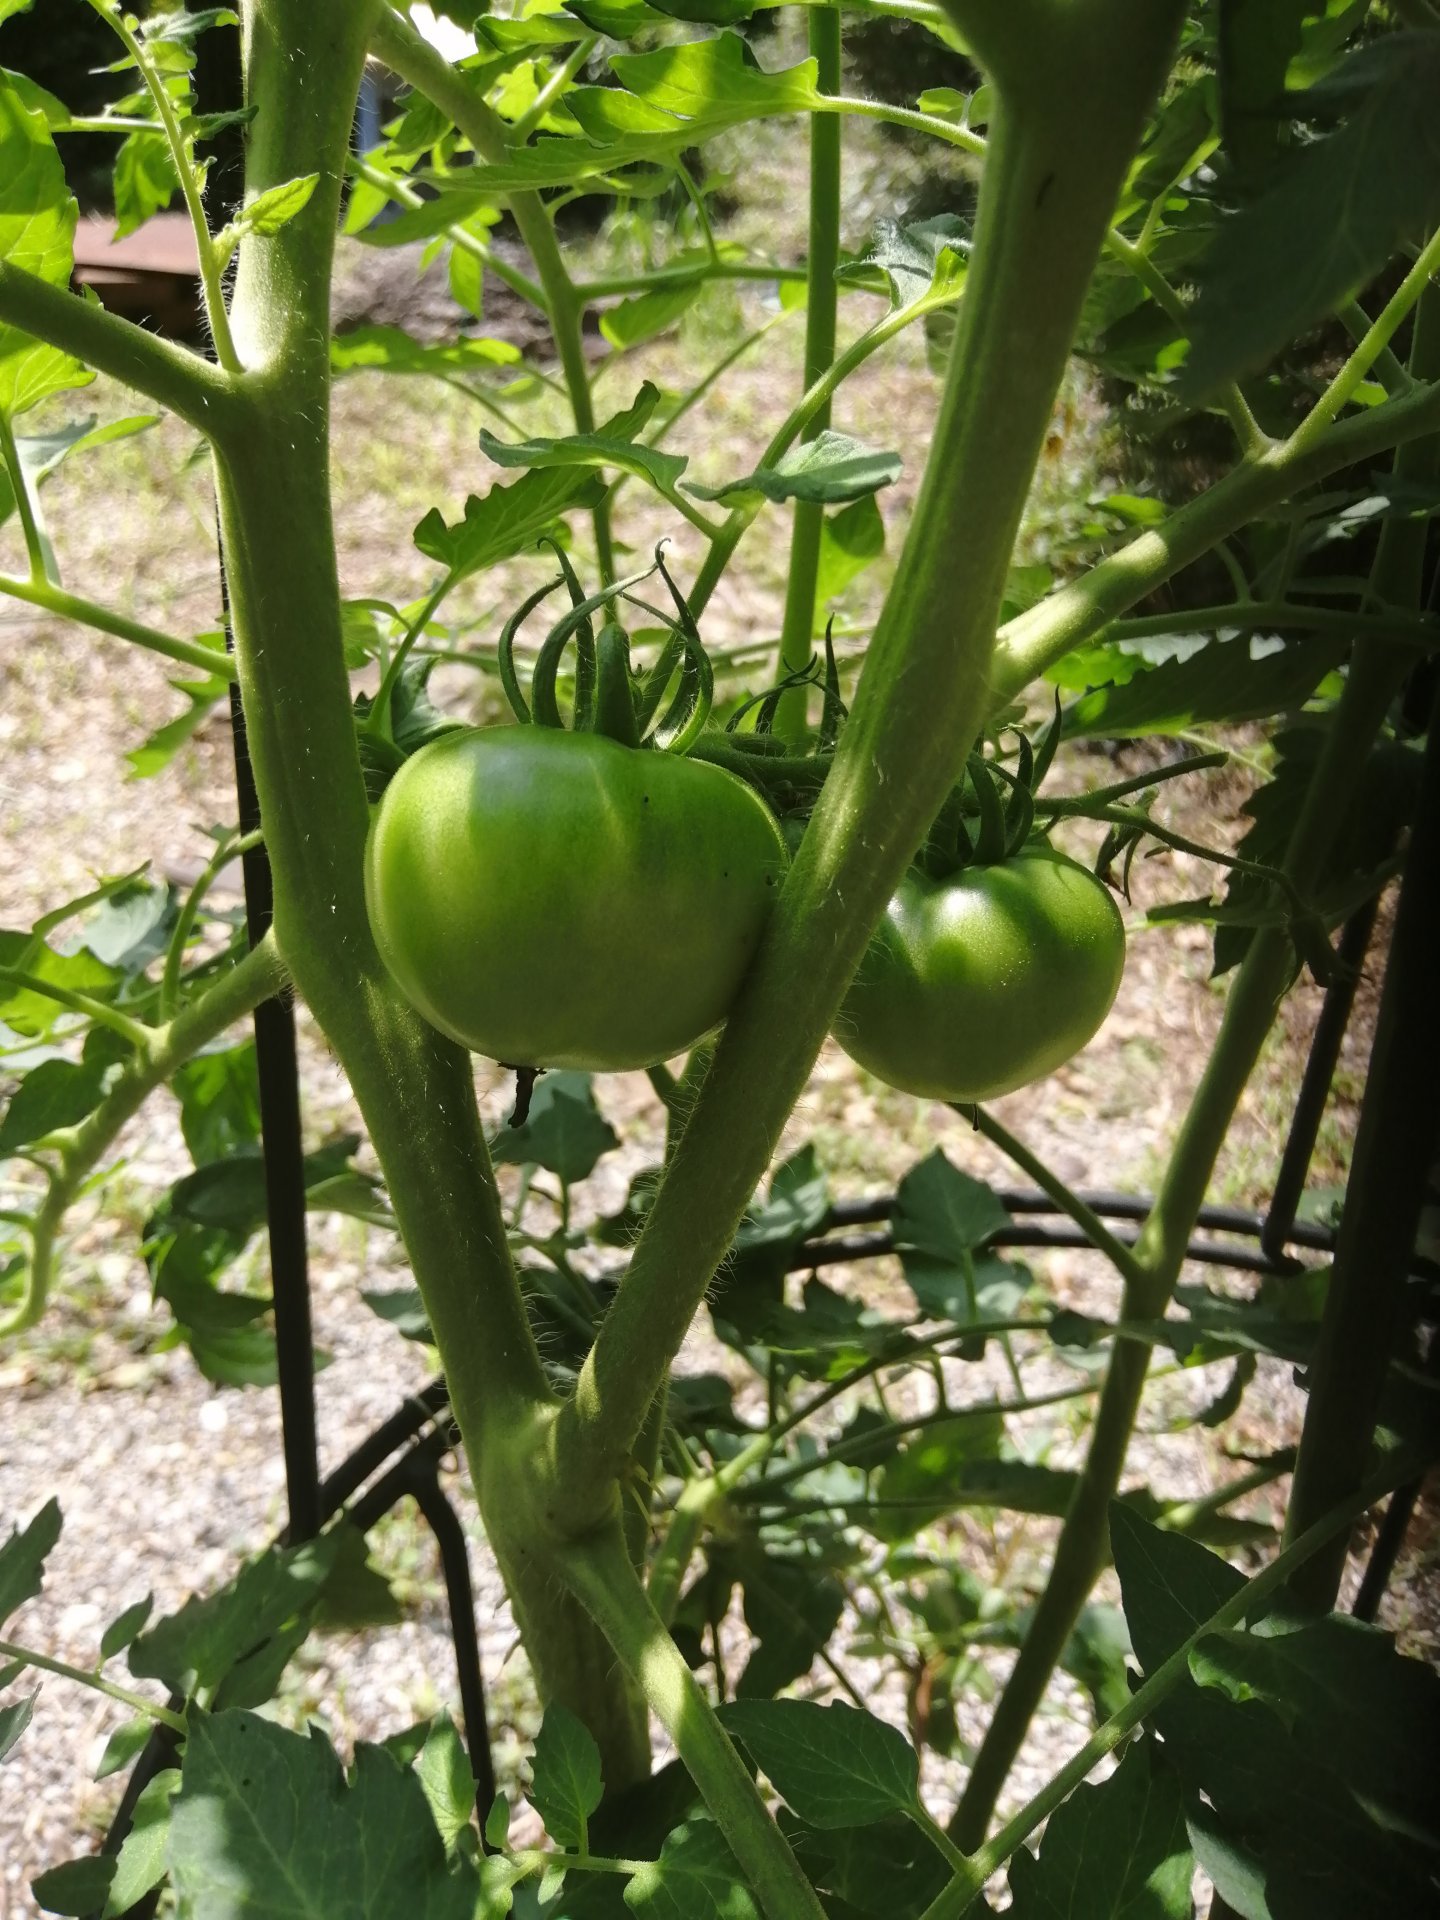 Mystery tomatoes